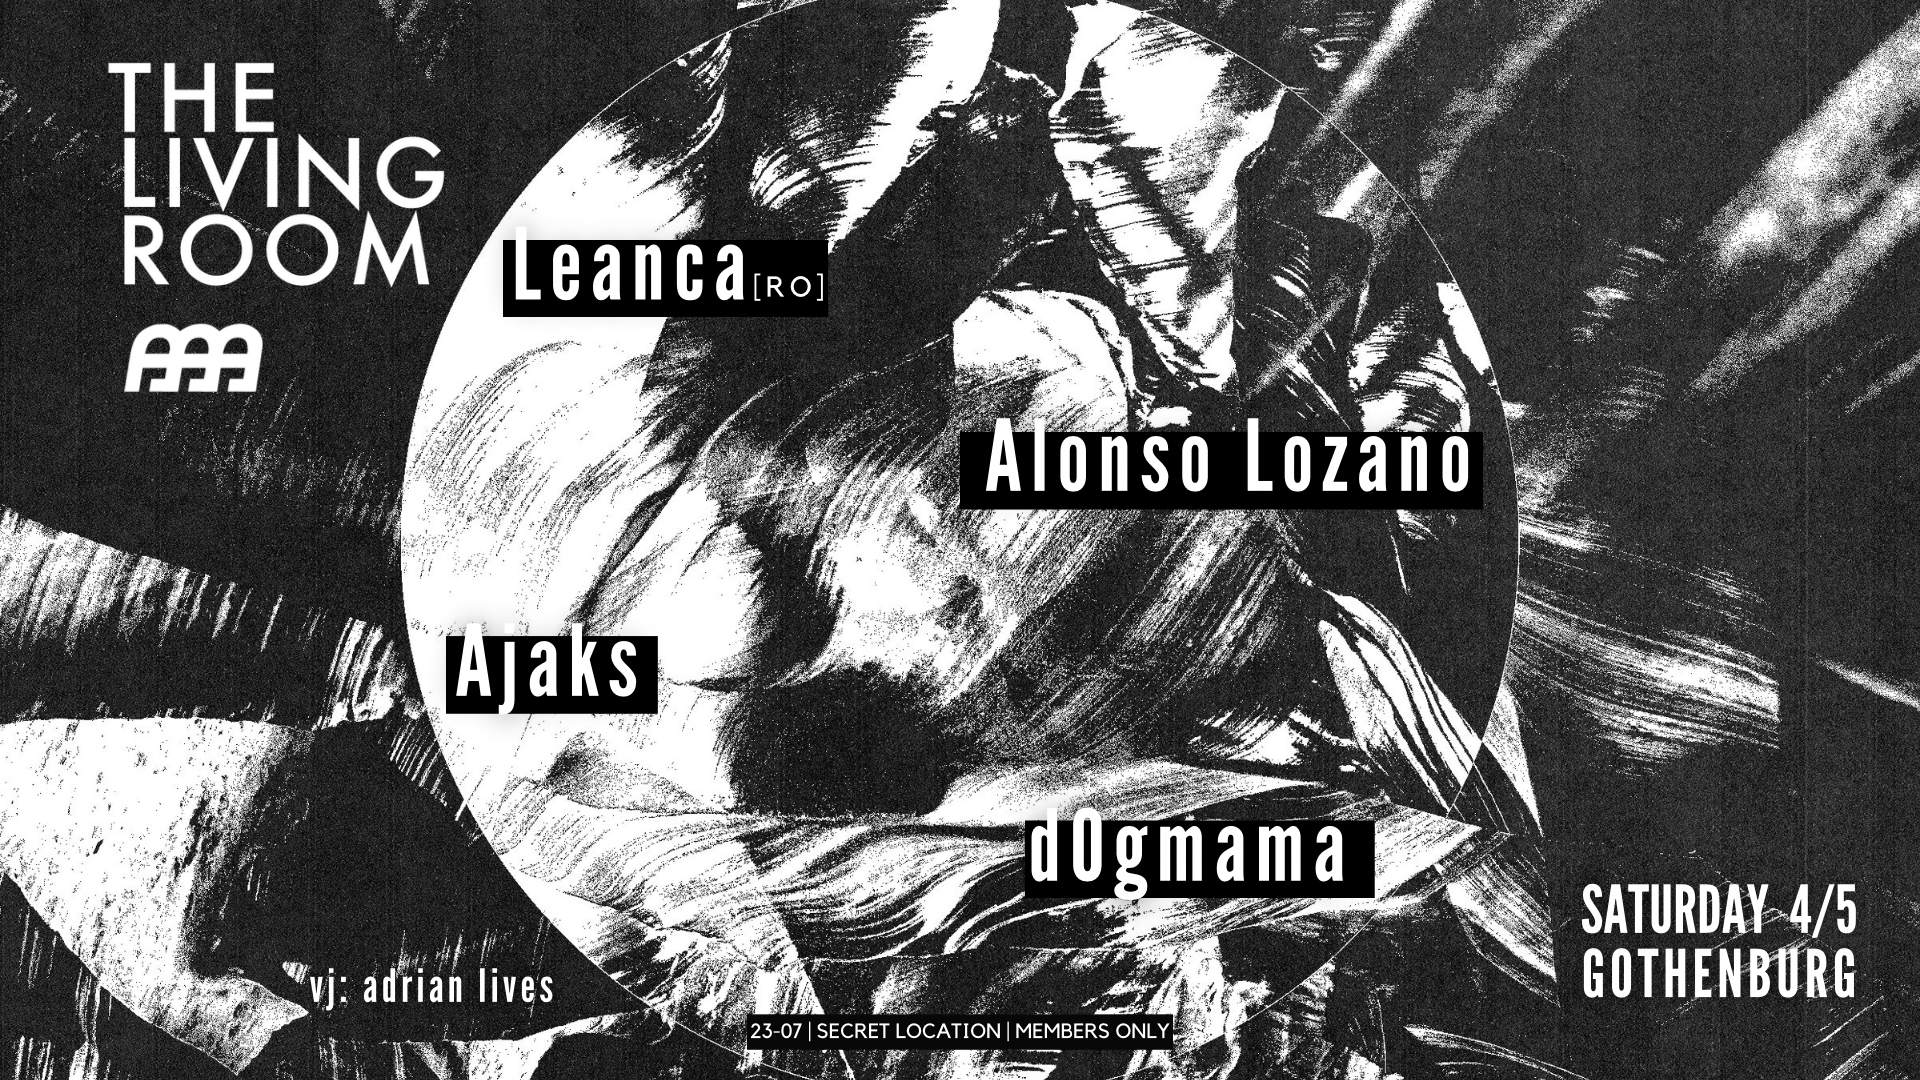 The Living Room with Leanca [RO], Alonso Lozano, Ajaks & d0gmama - Página frontal